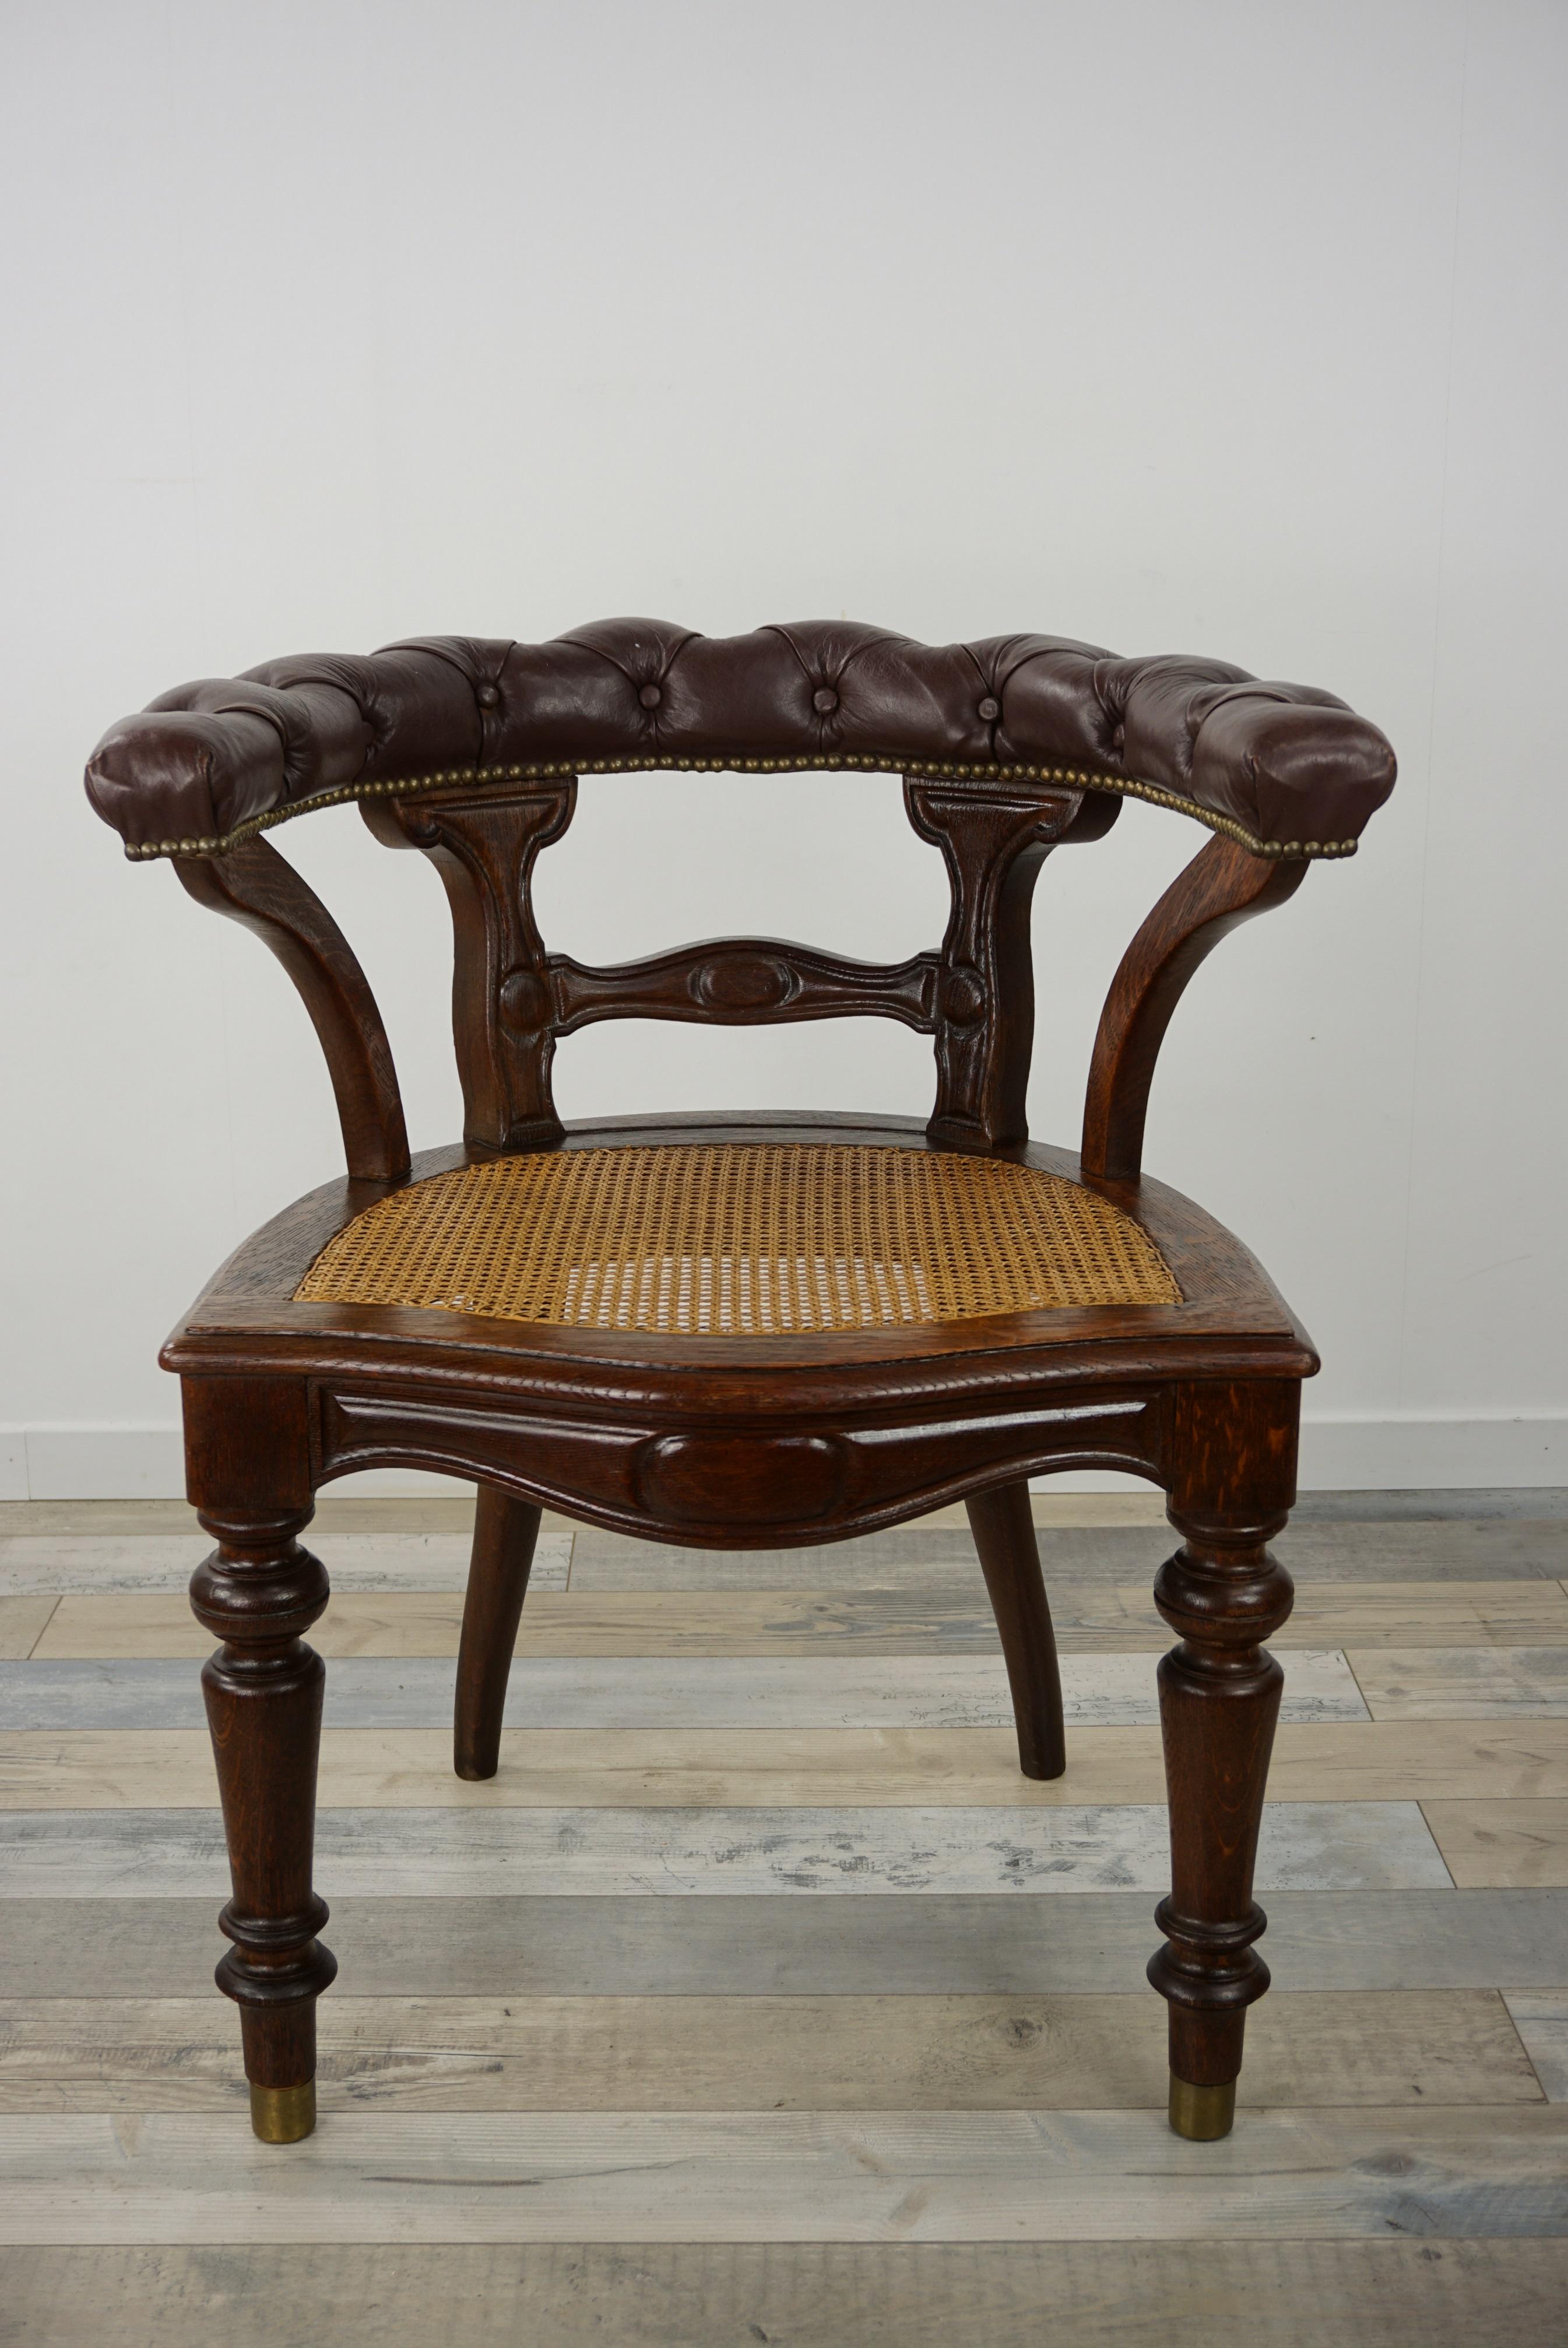 Leather and Wicker Cane 19th Century William IV Design Antique Desk Chair 8